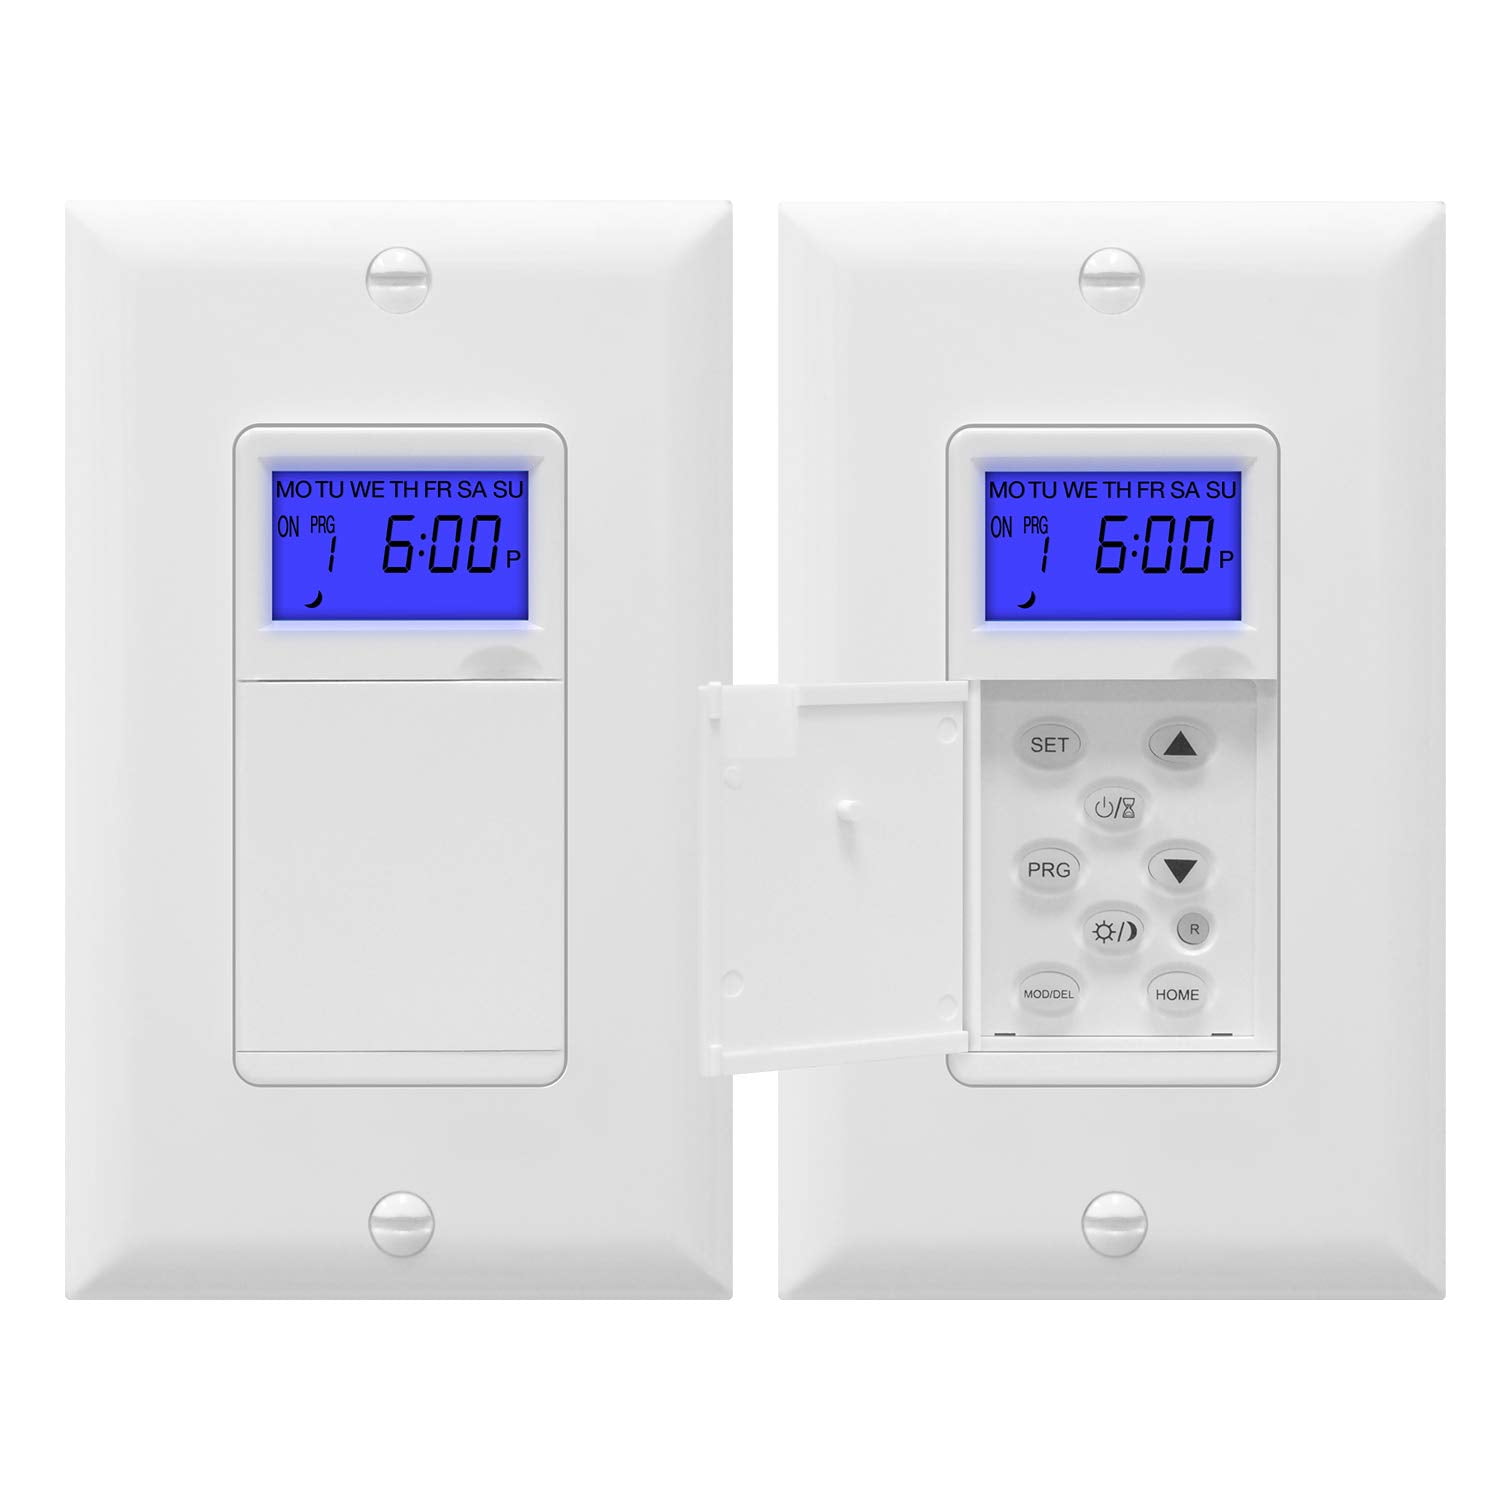 TGT01-H, Digital Programmable Sunrise TOPGREENER Fans, UL 3-Way, Switch, Wire Timer White, Wall Motors, in for Neutral Single-Pole Pack 7-Day or Sunset Astronomic 2 Listed, Lights, and timer Required,